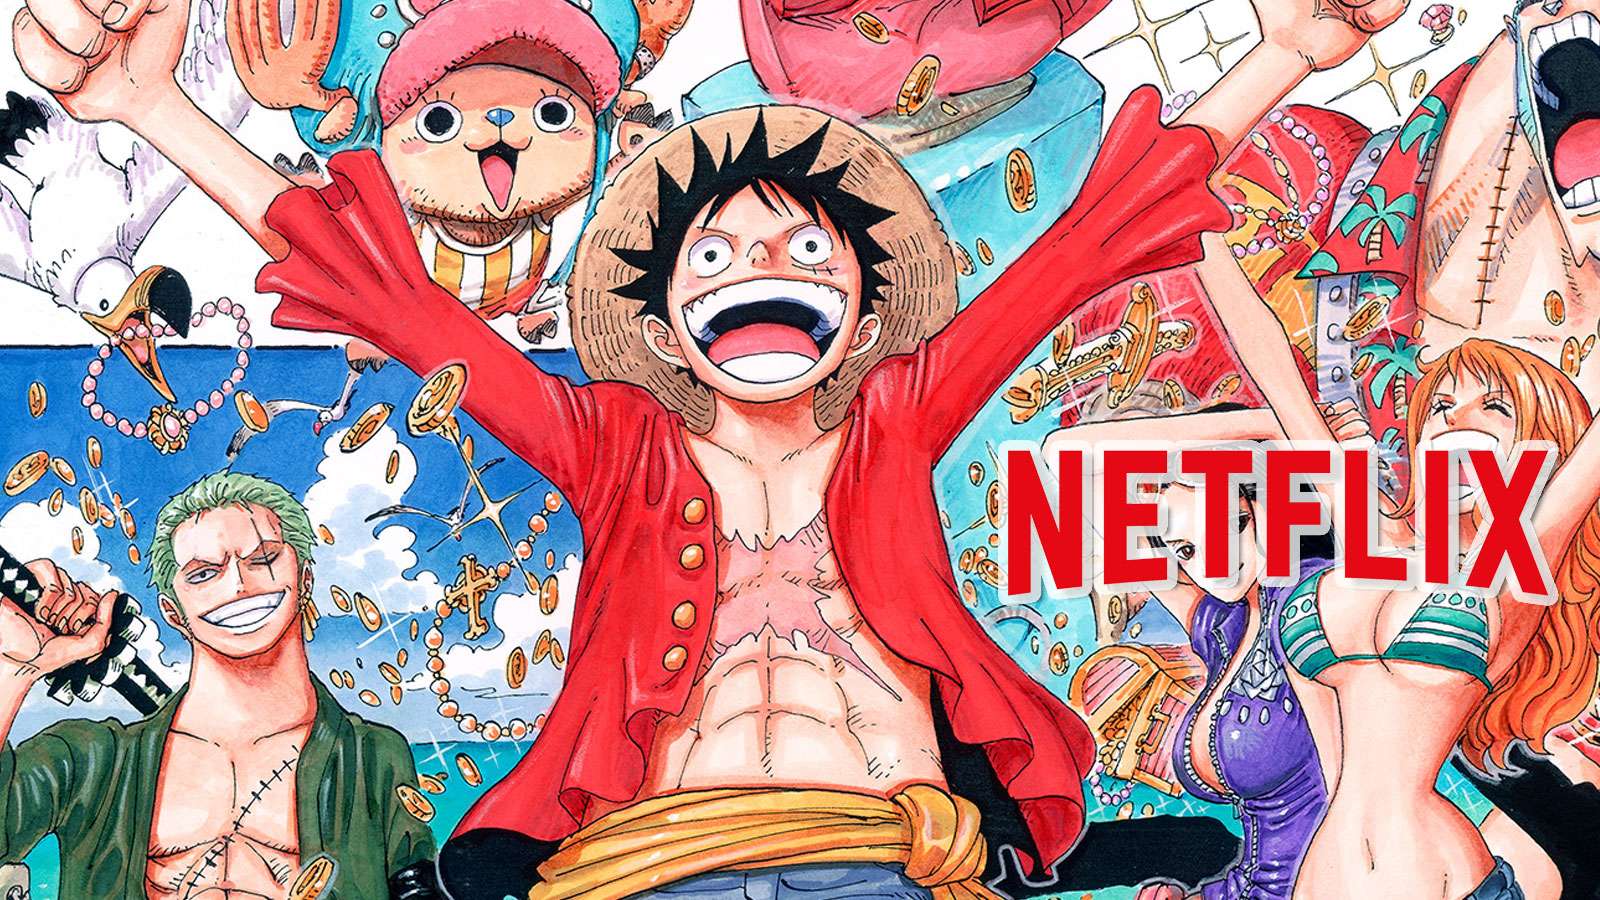 the cast of one piece with a netflix logo